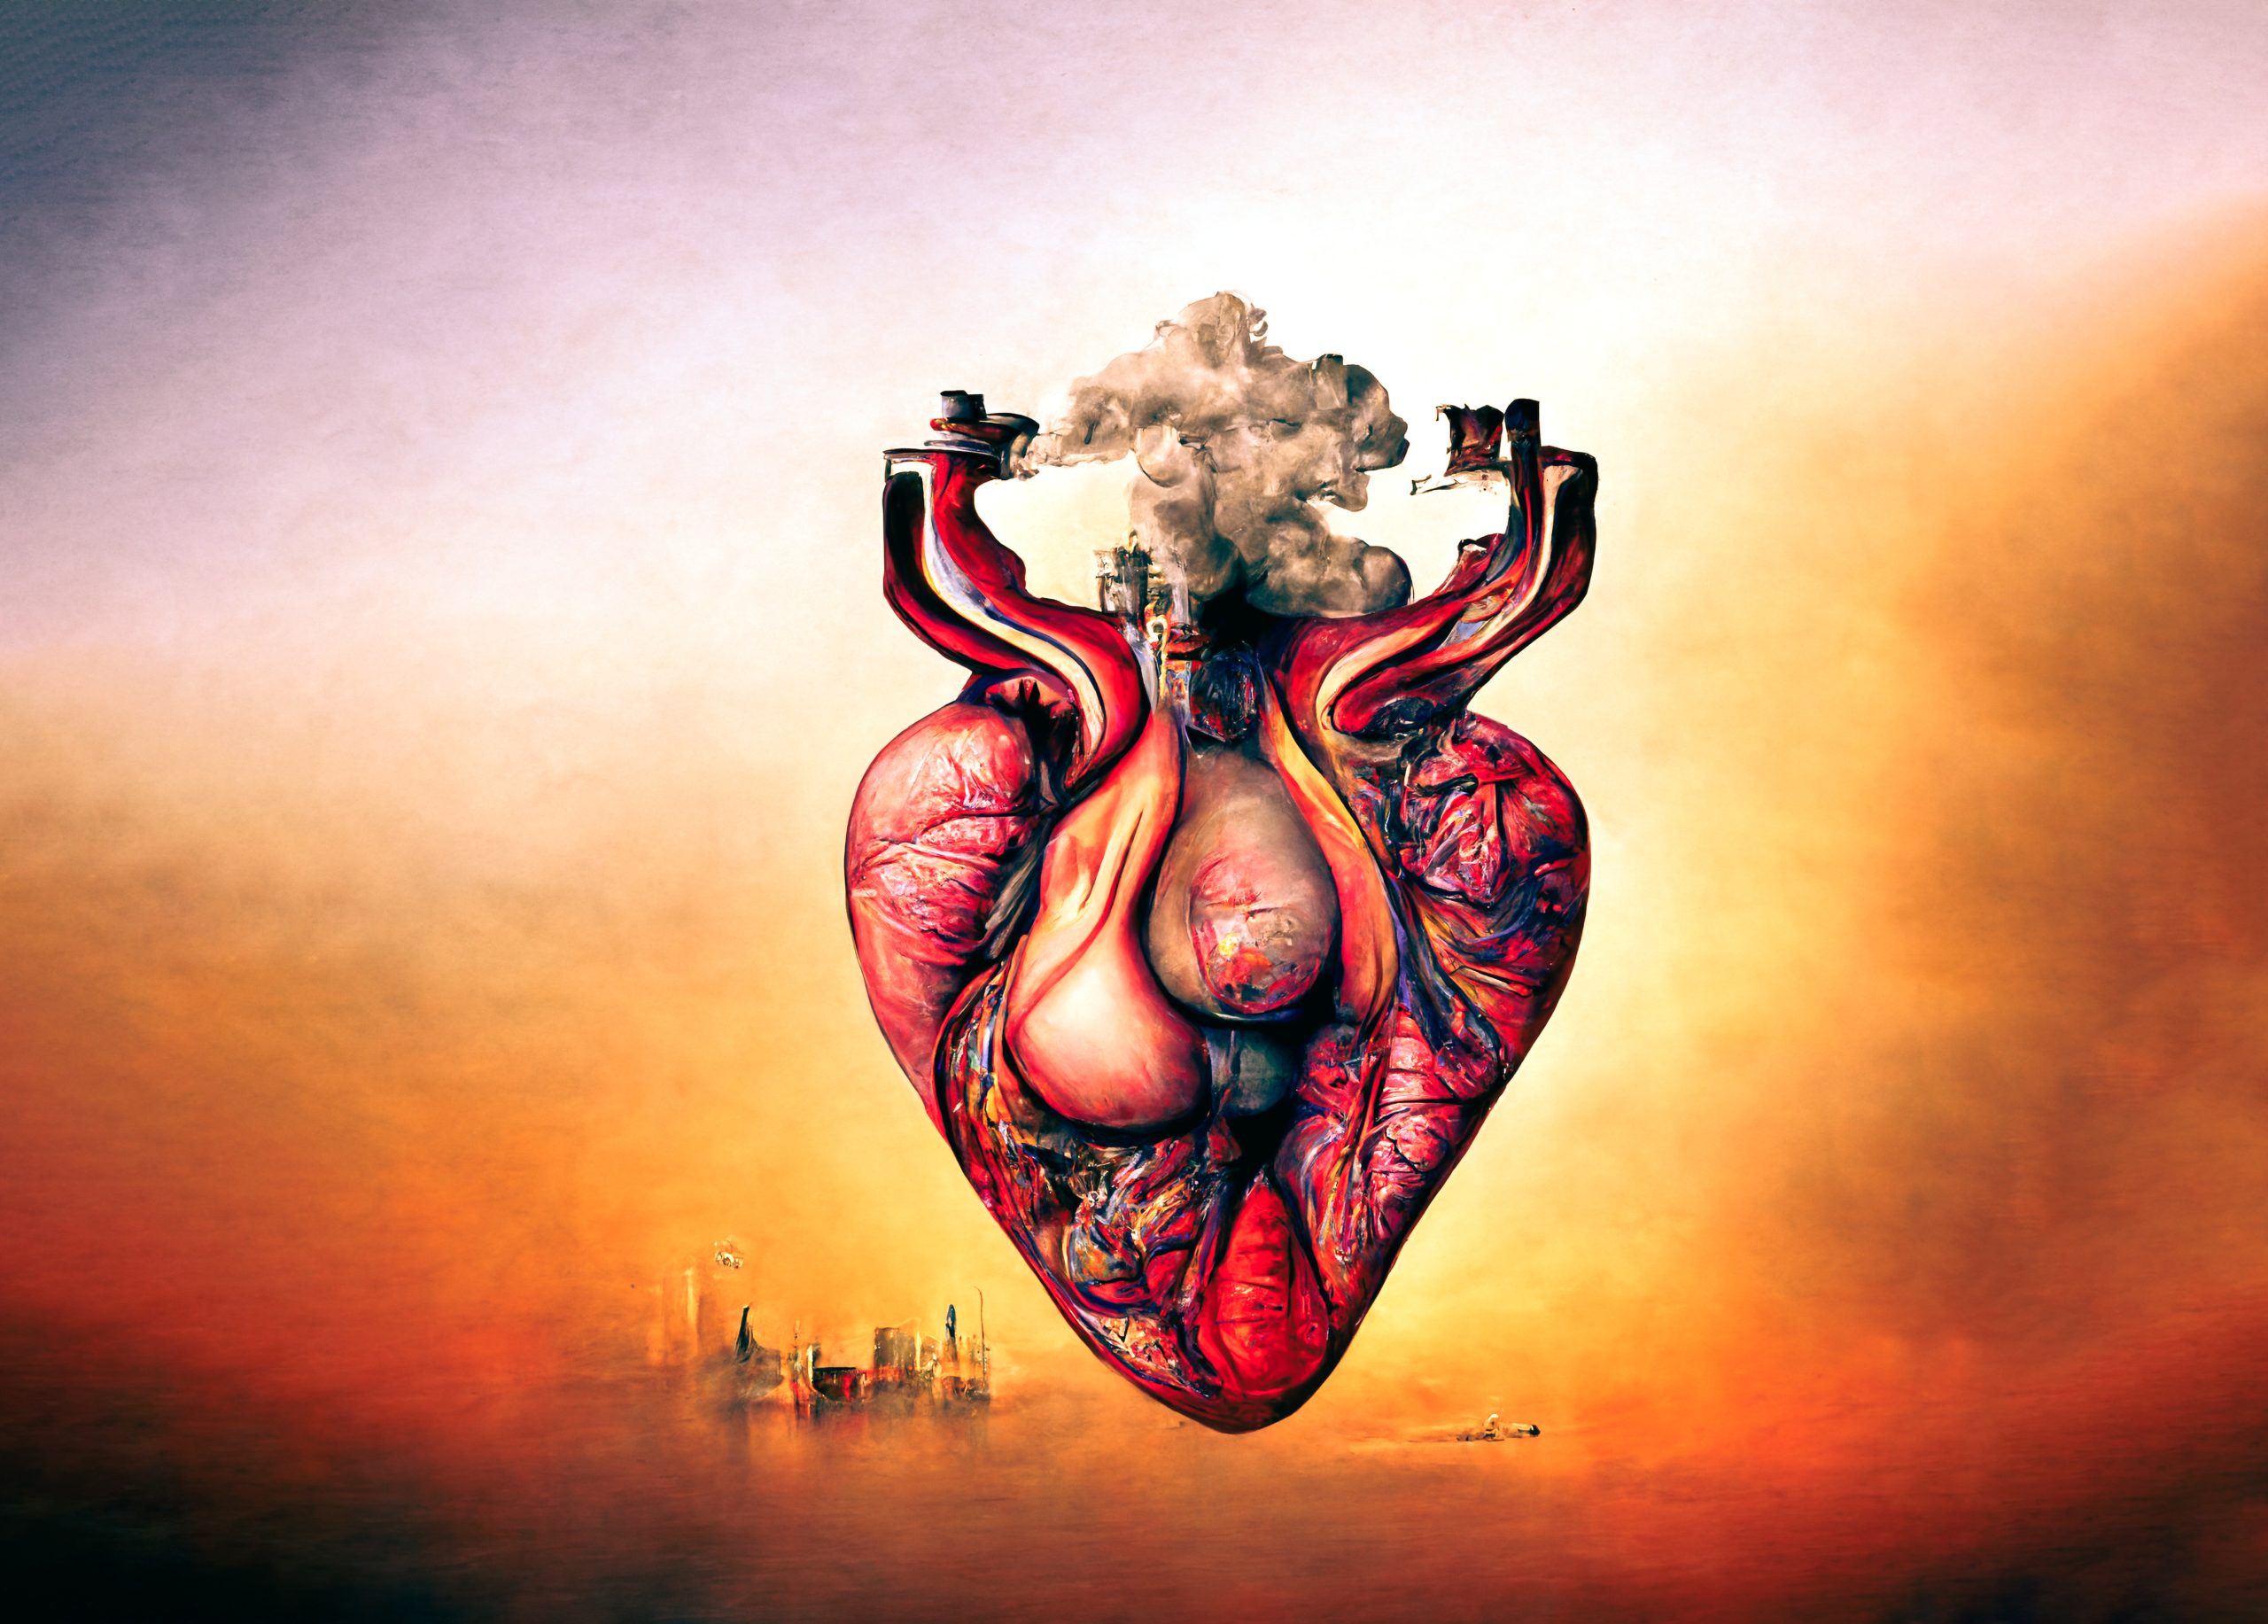 More “sudden heart attacks” …with a “climate change” twist